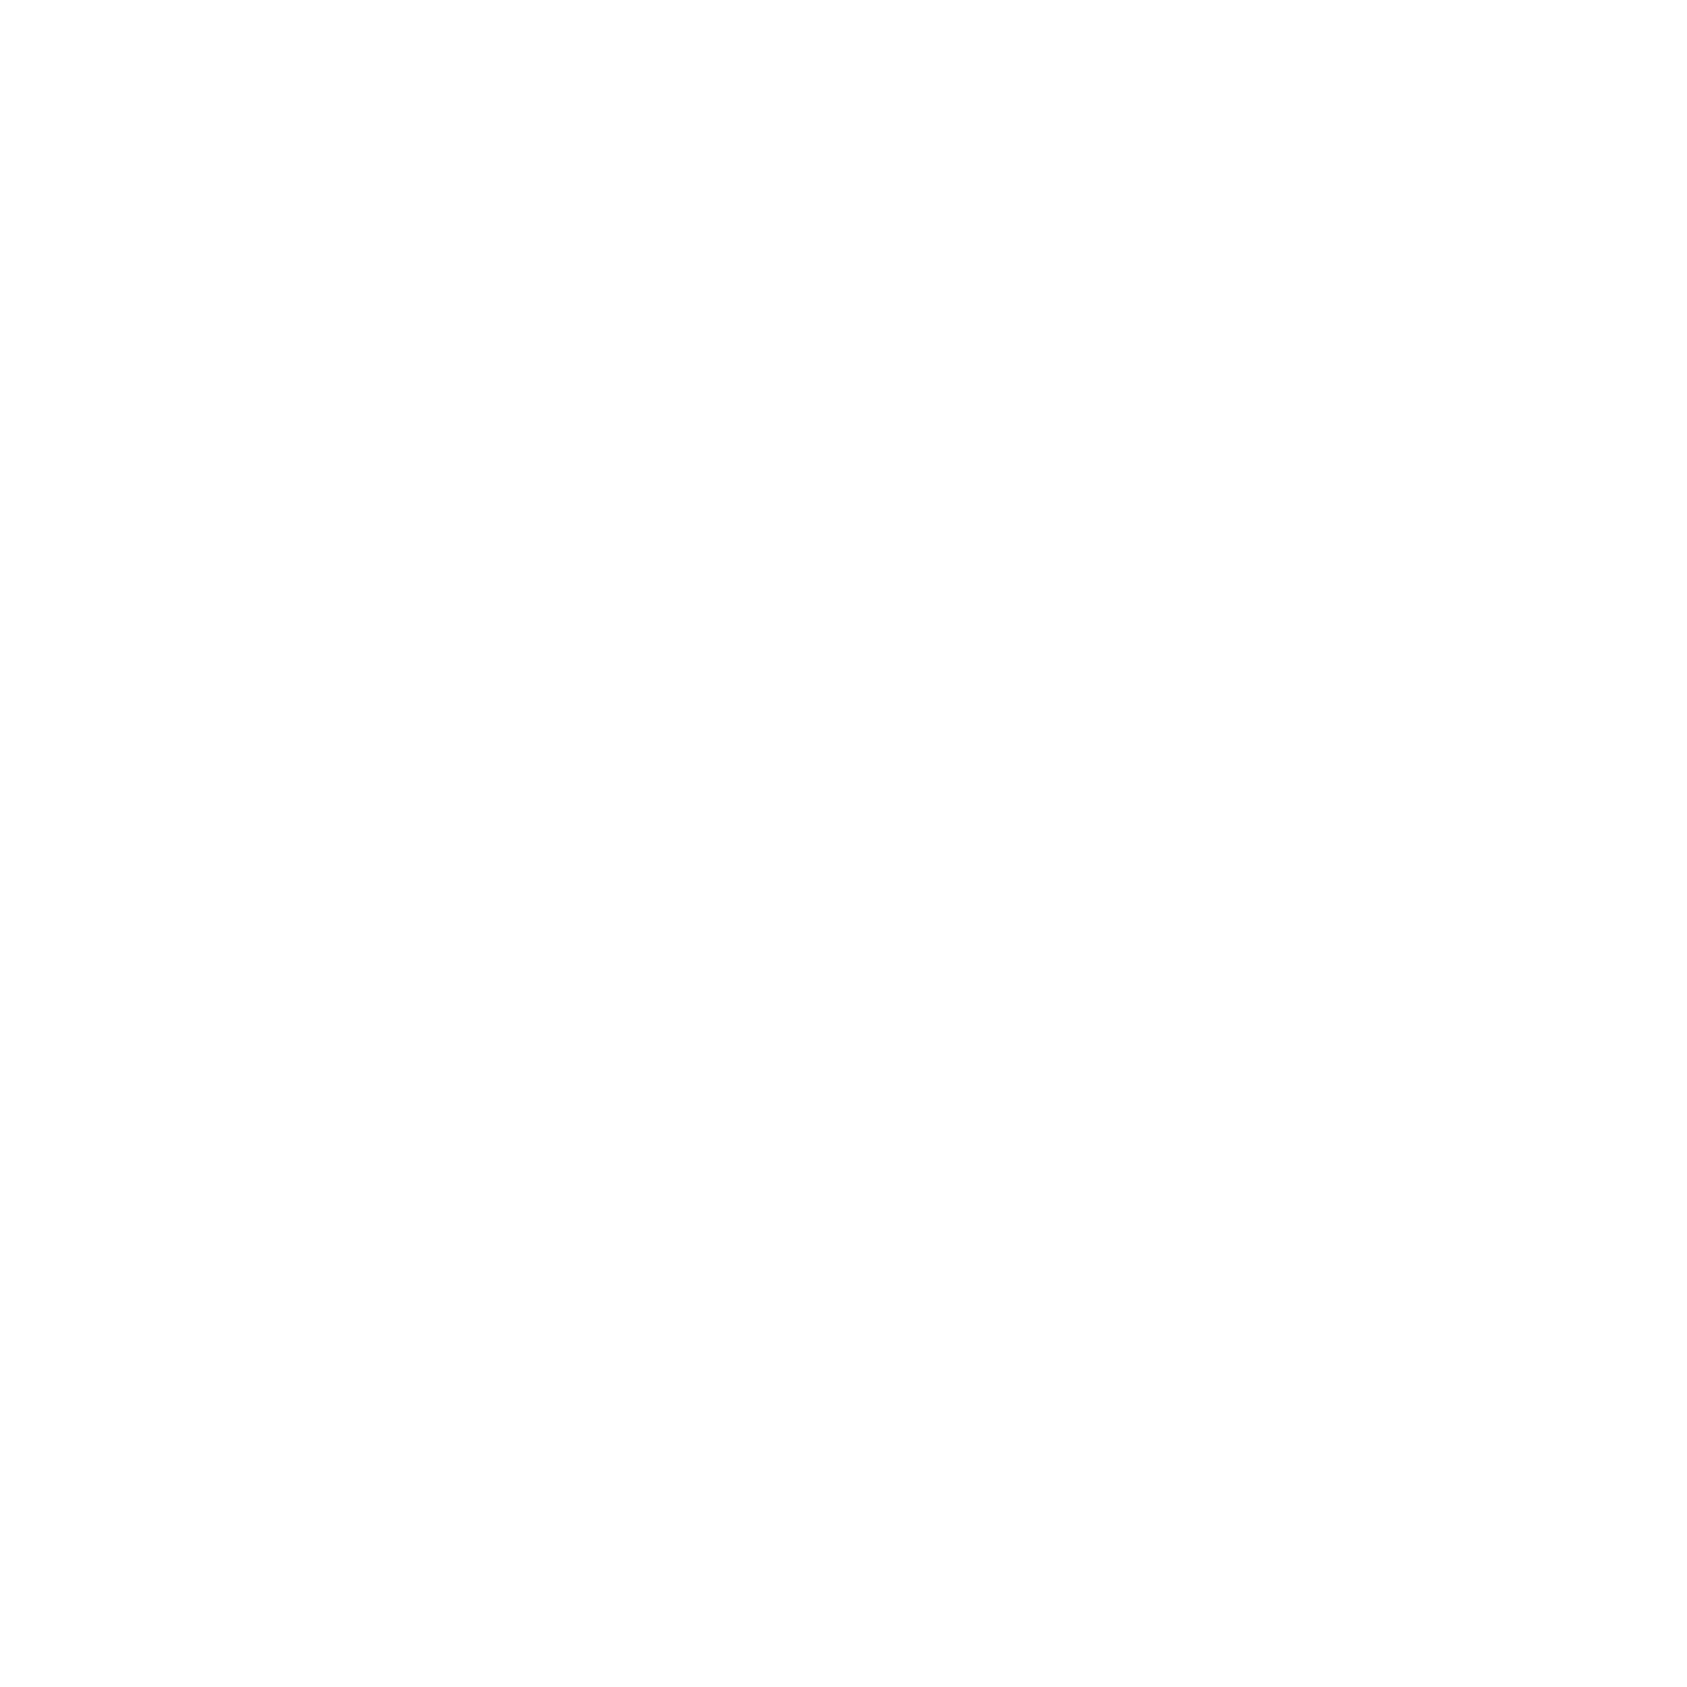 This is the Twitter icon.